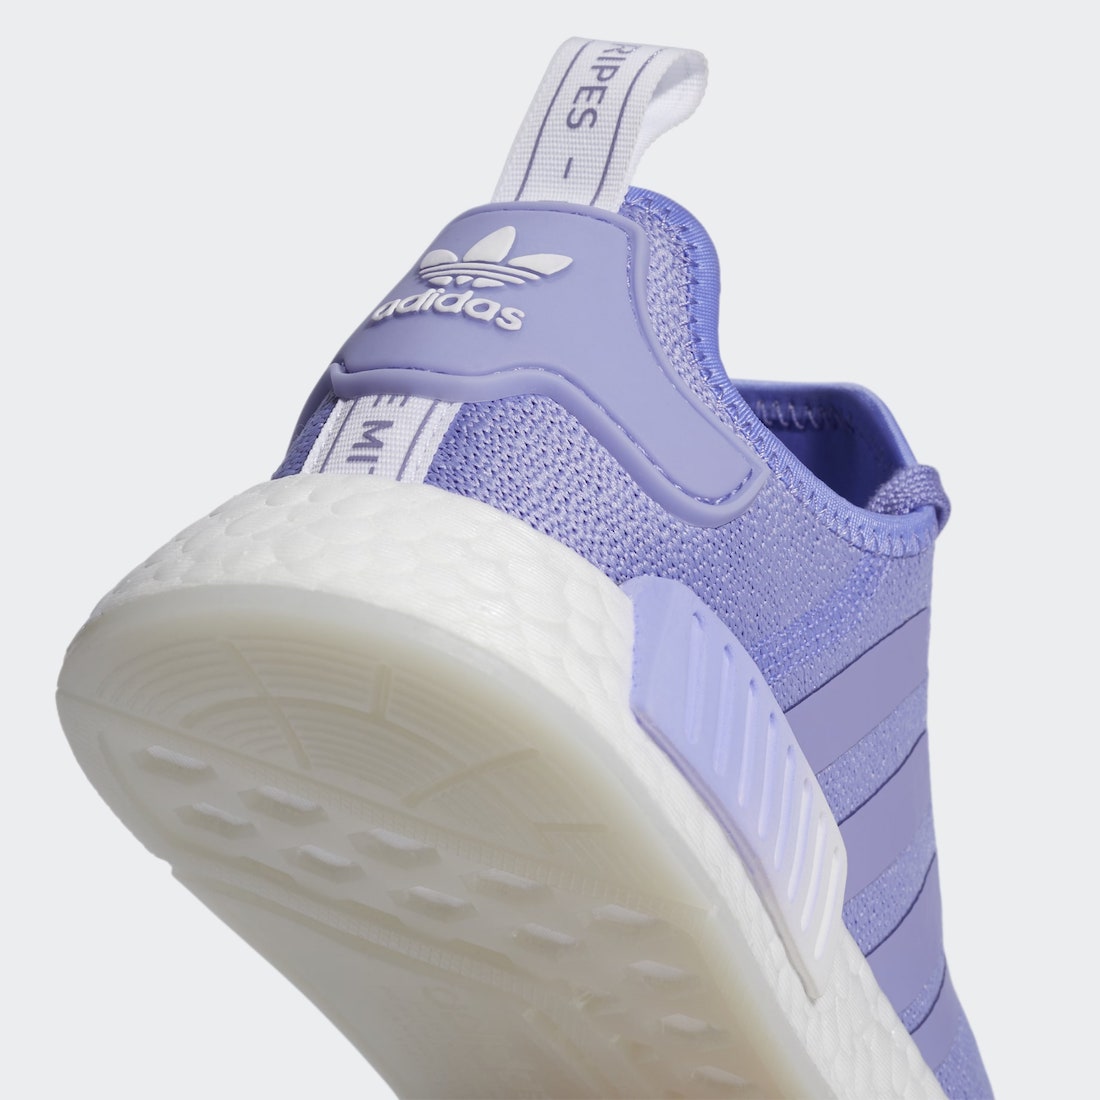 adidas NMD R1 “Light Purple” With Color-Faded Midsole Plugs | Sneakers ...